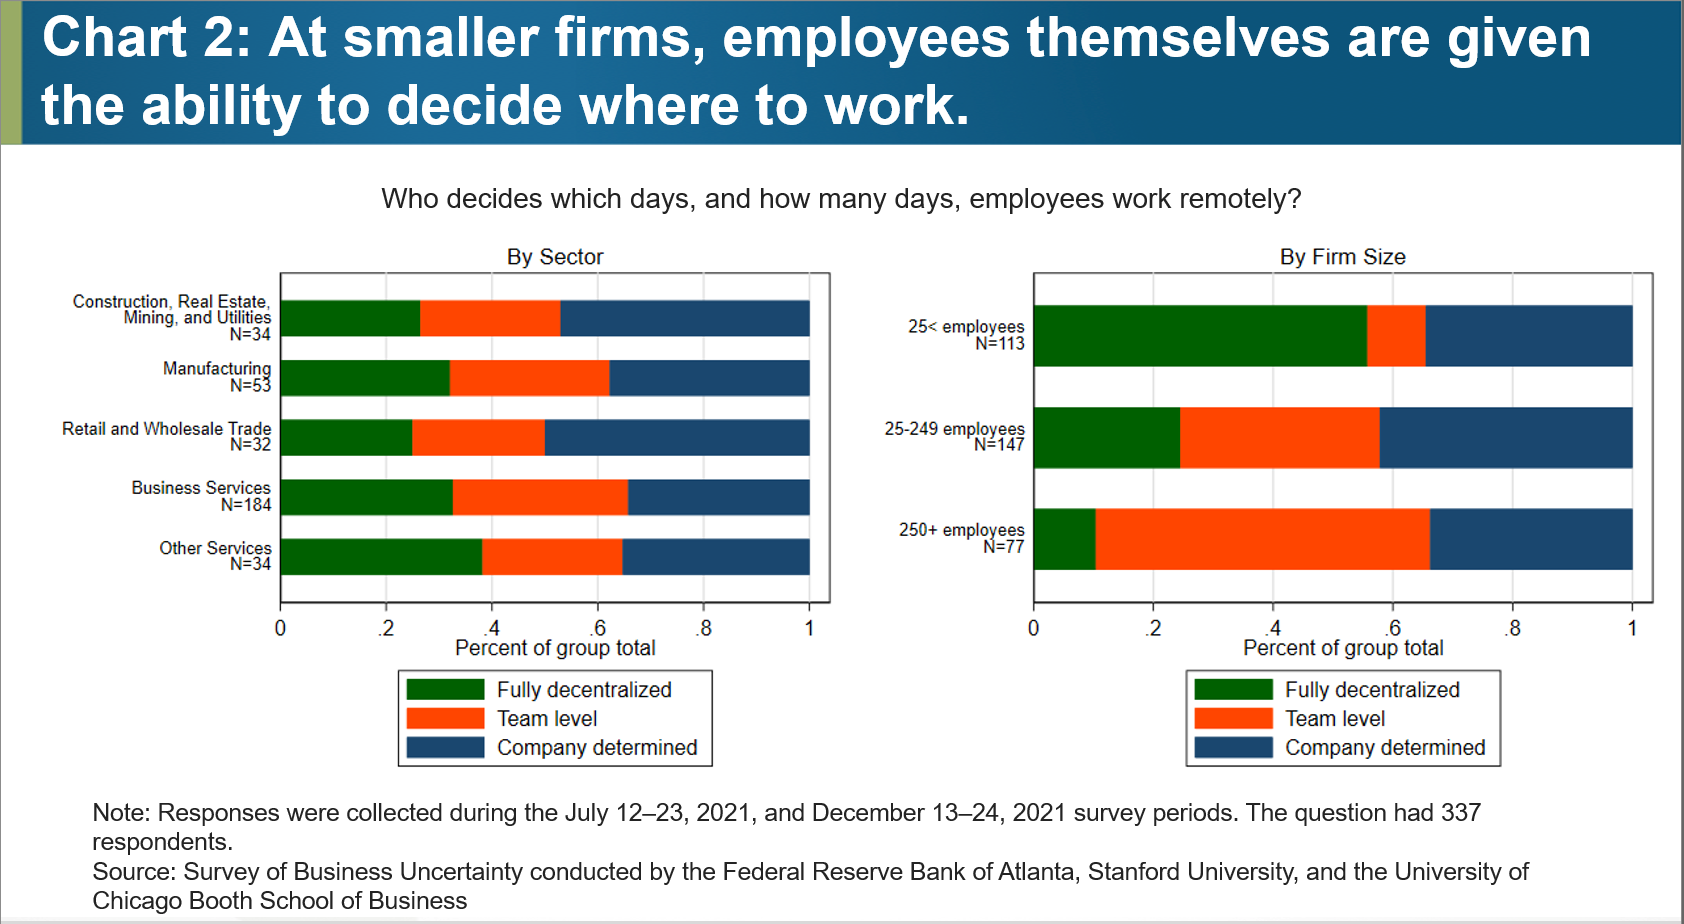 Chart 2: At smaller firms, employees themselves are given the ability to decide where to work